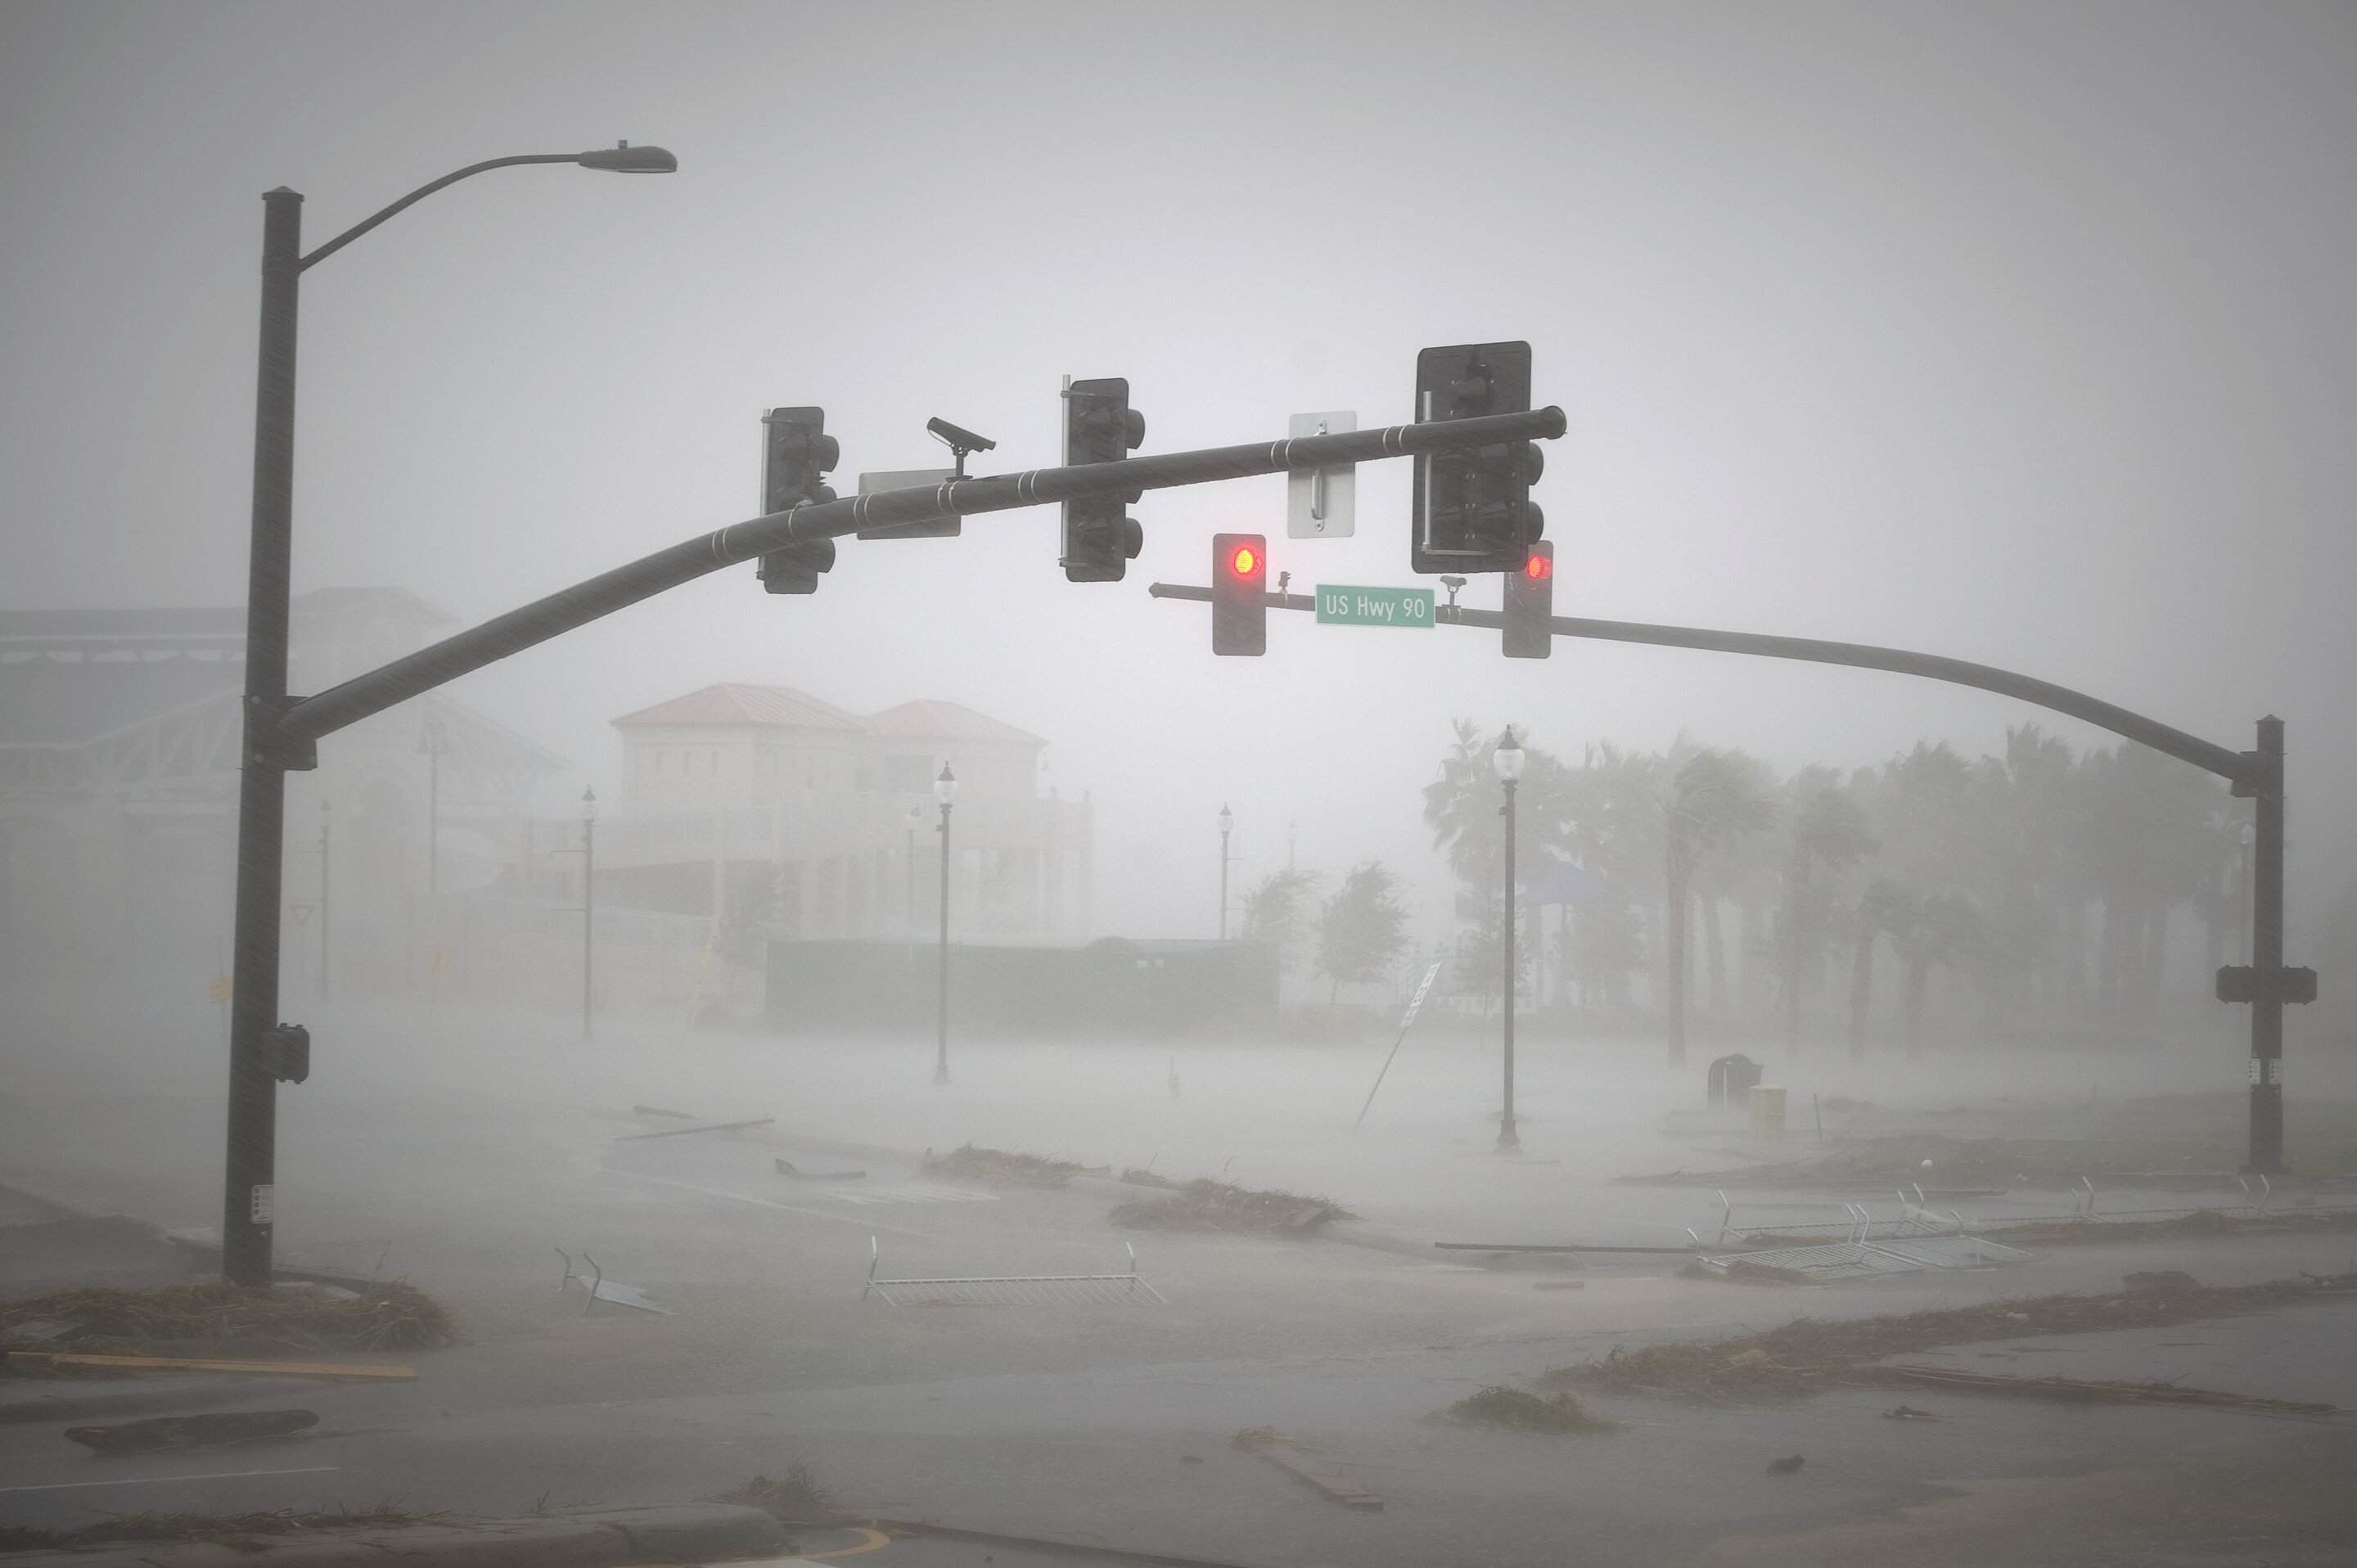 Burying short sections of power lines would drastically reduce hurricanes' futur..